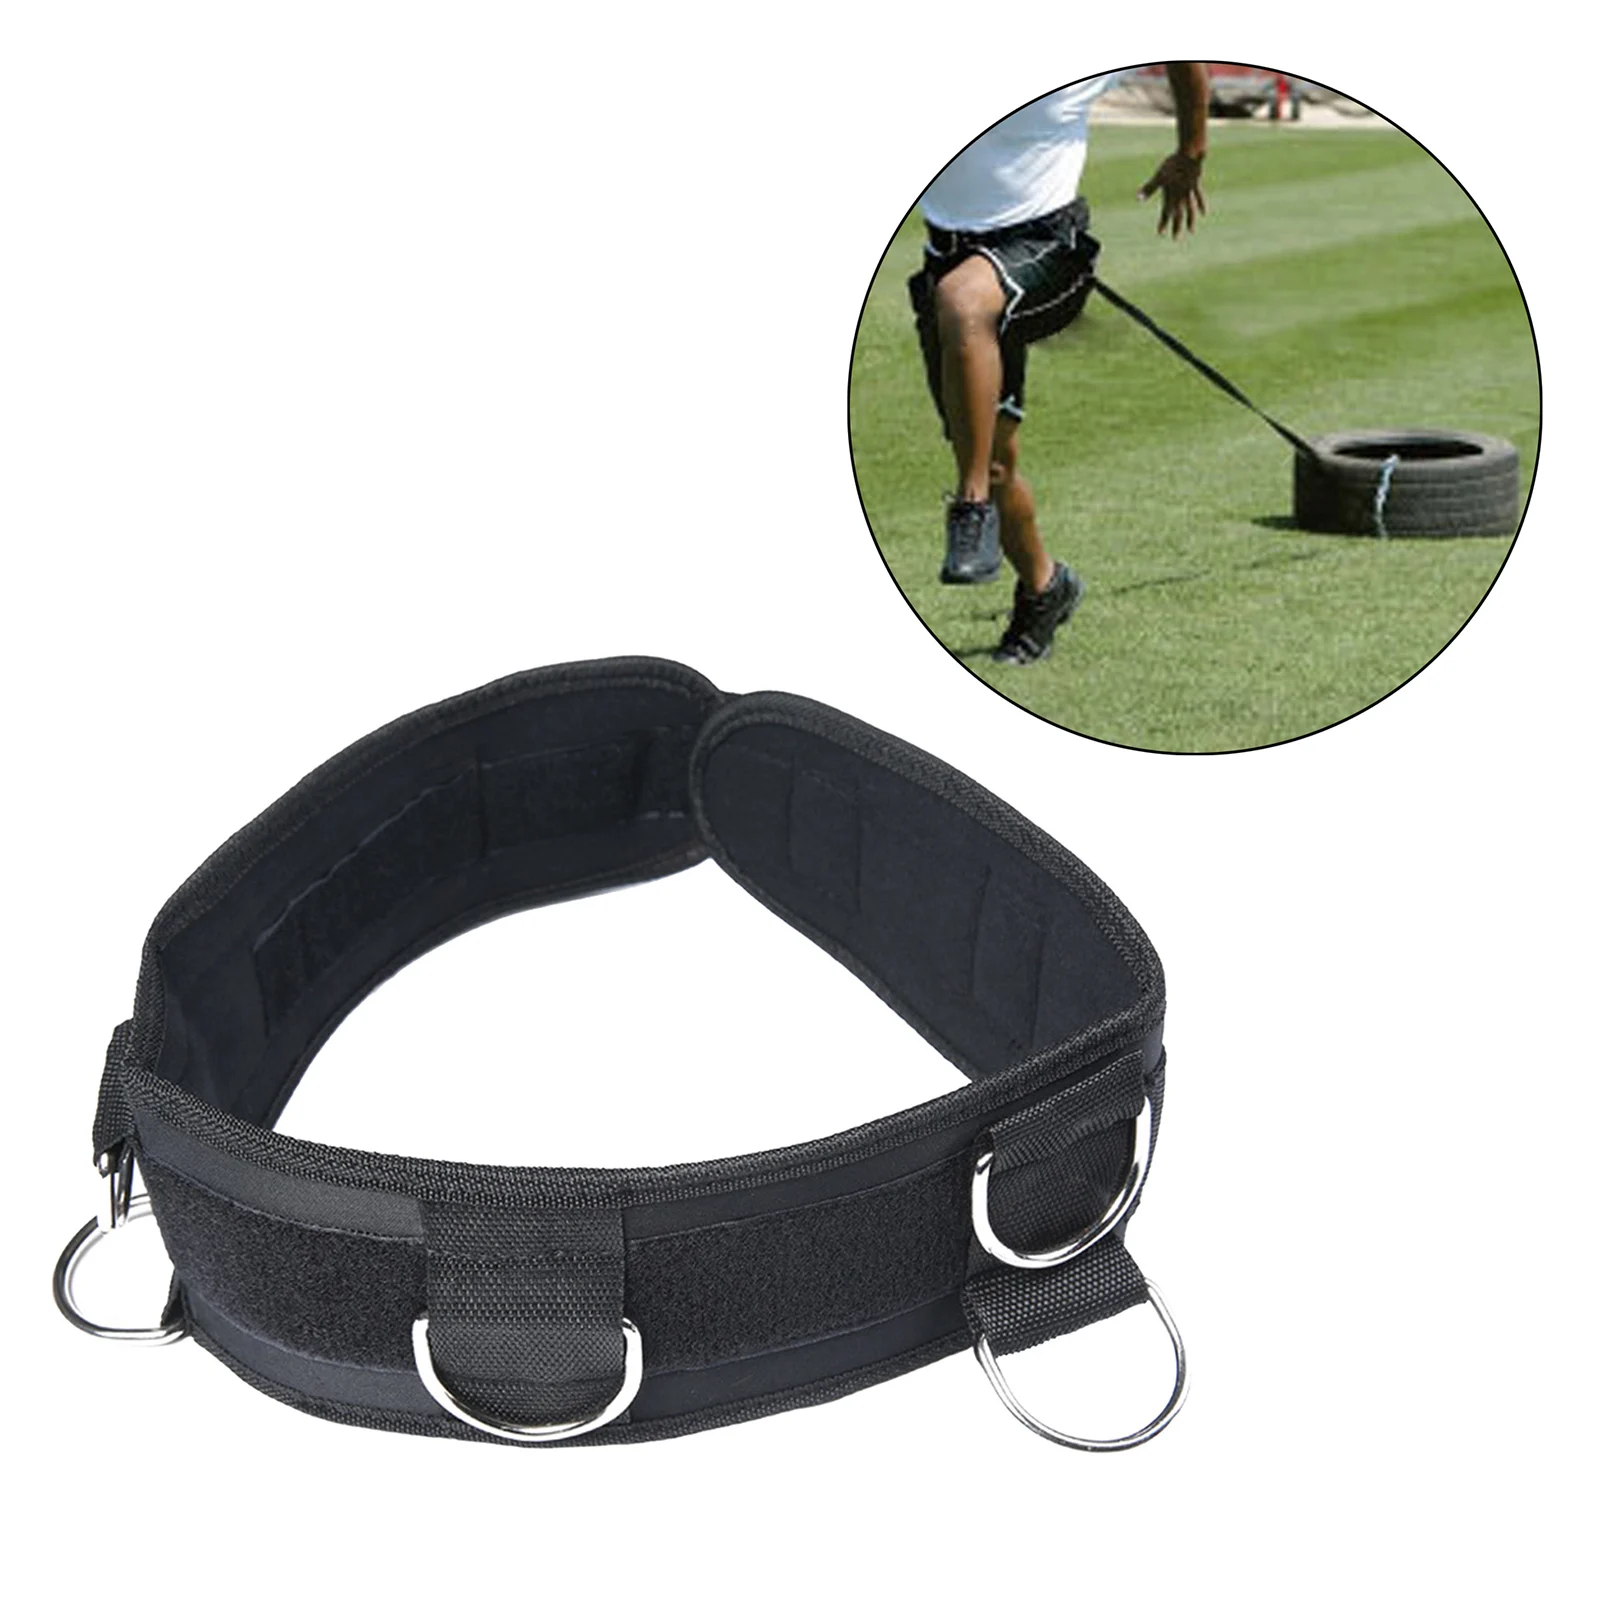 Bounce Trainer Belt Waist Strap Adjustable Sport Running Gym Resistance Band Speed Agility Resistance for Cable Machines